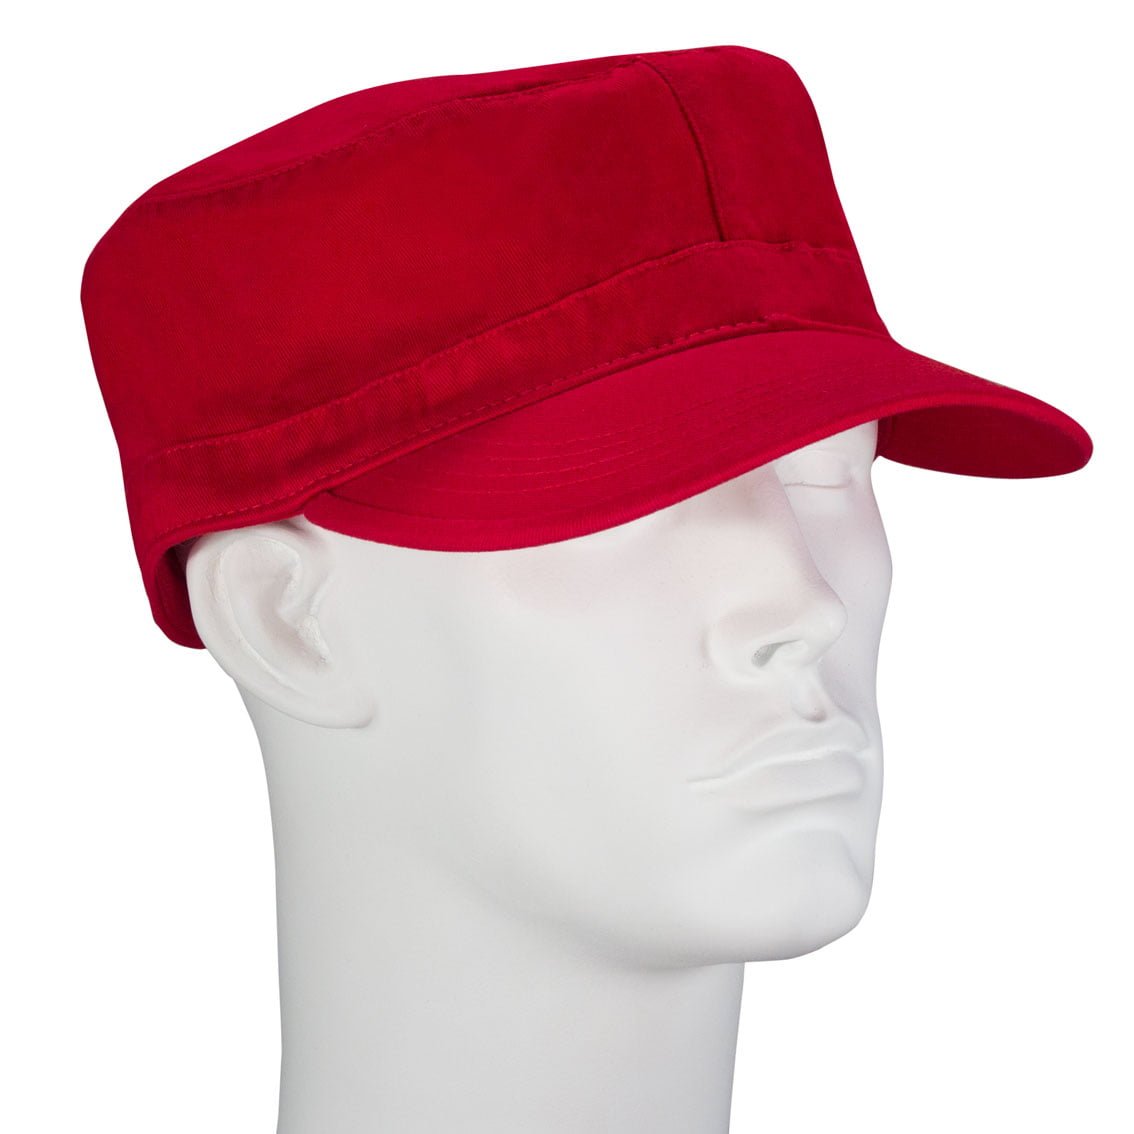 12pcs Red Solid Castro Military Fatigue Army Hats - Fitted - Unconstructed - 100% Cotton - Bulk by the Dozen - Wholesale